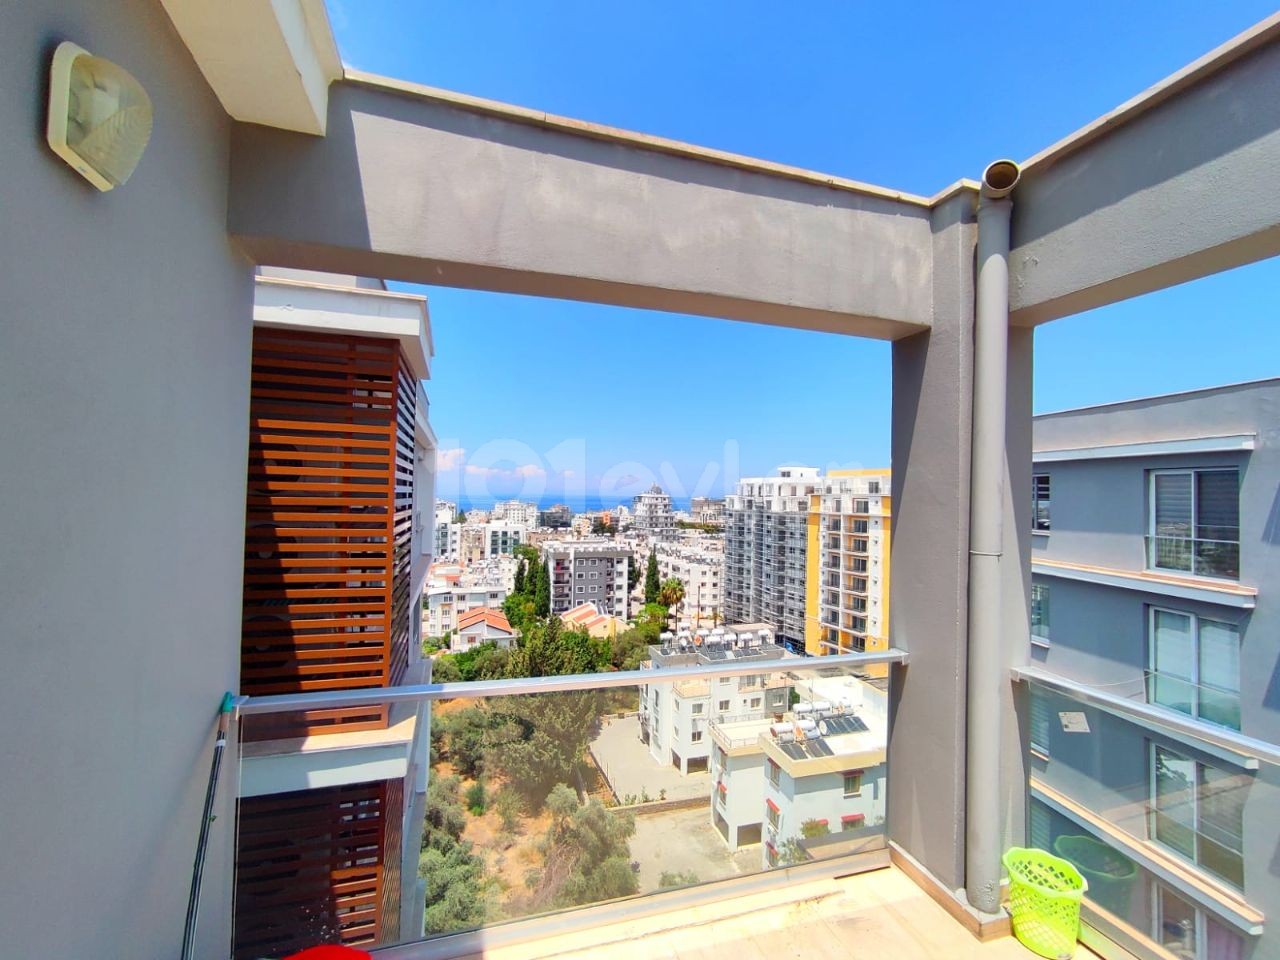 Ensuite 3-Bedroom Penthouse for Rent in the Center of Kyrenia ** 